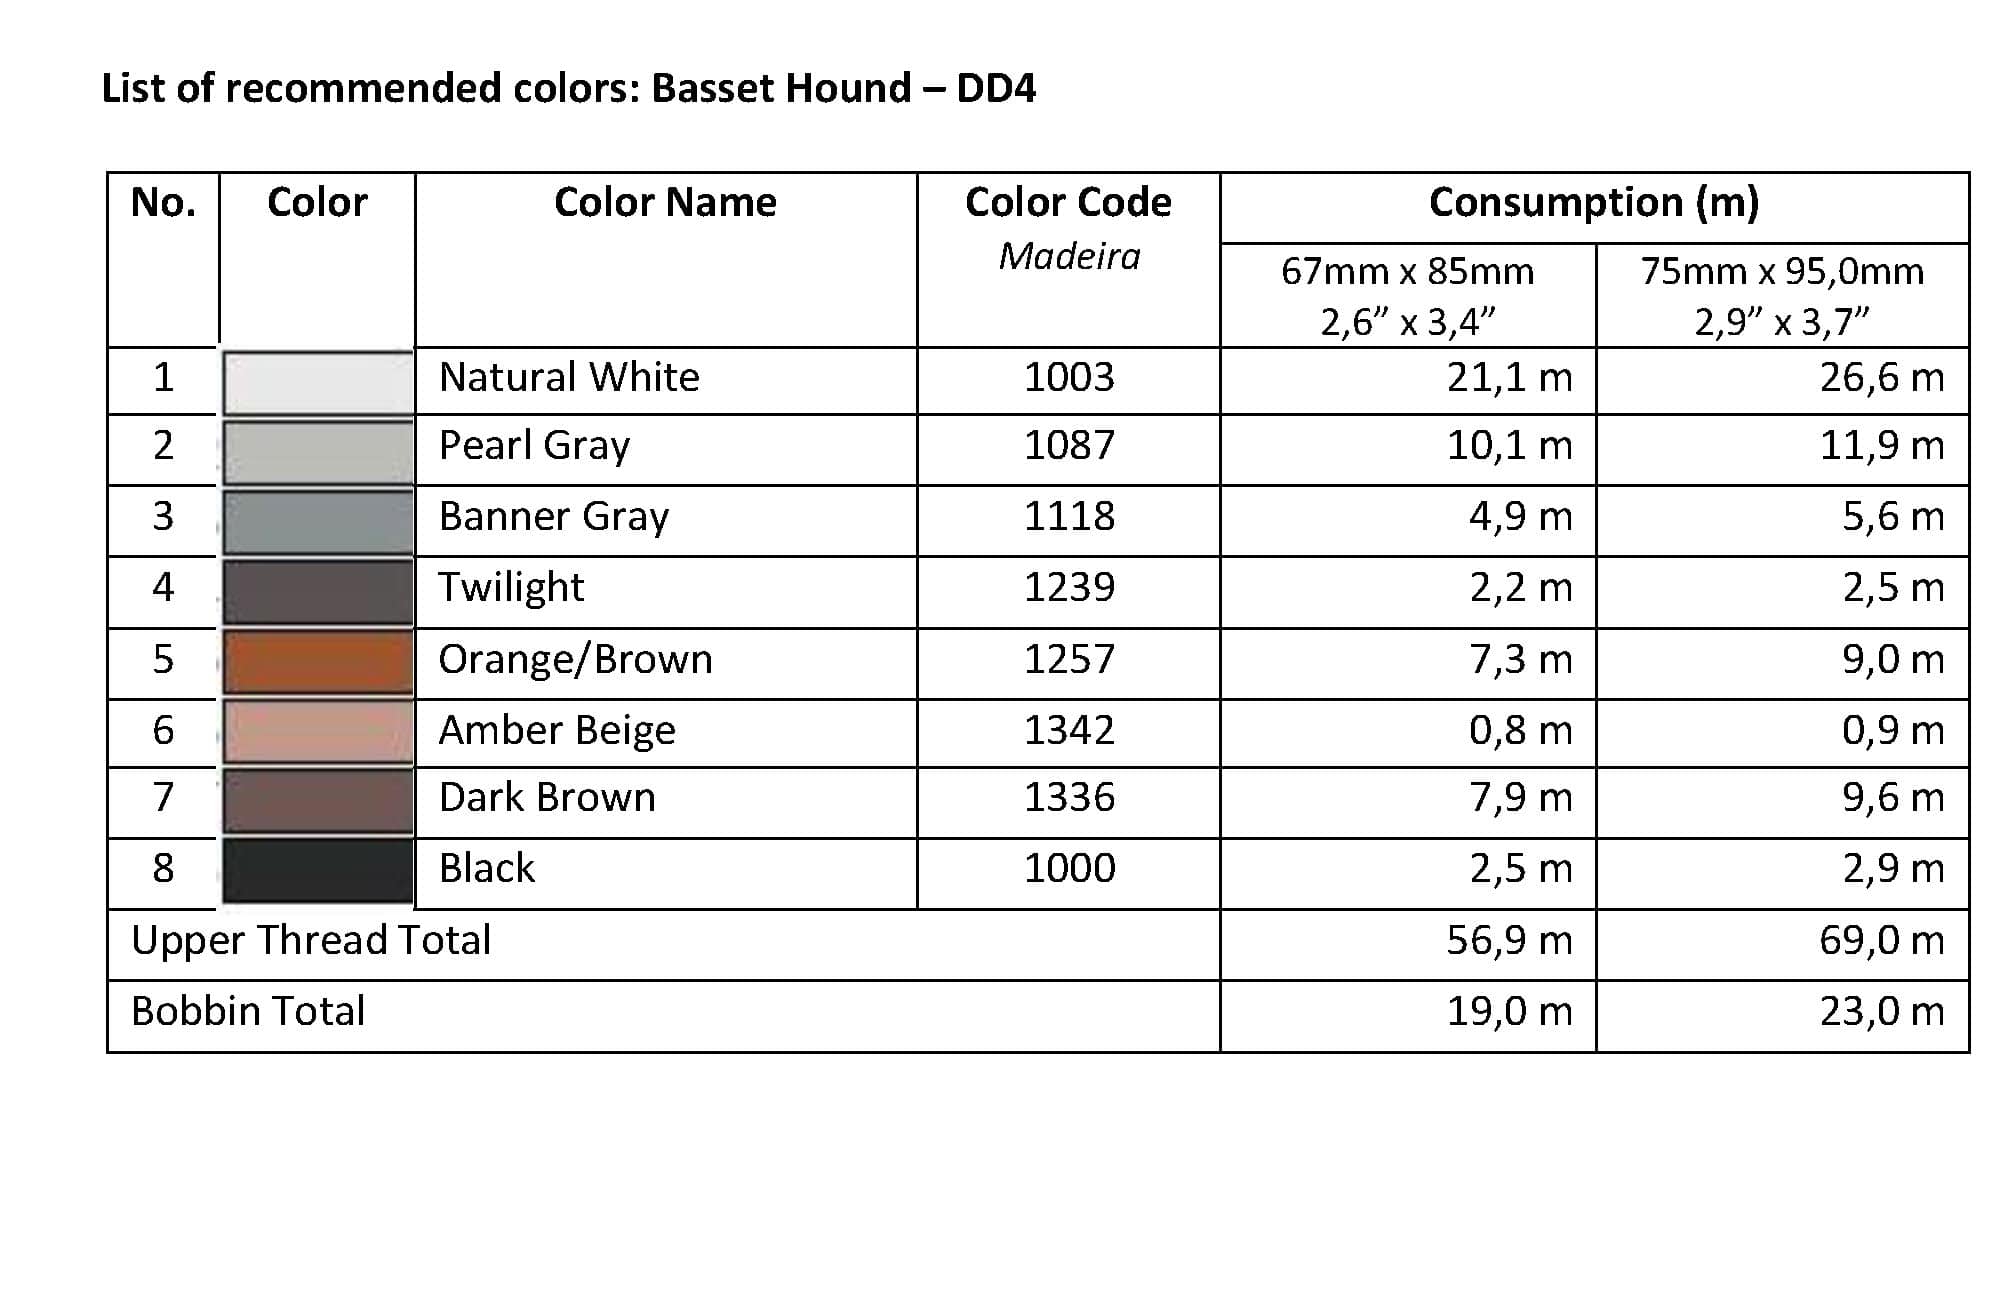 List of Recommended Colors - Basset Hound DD4